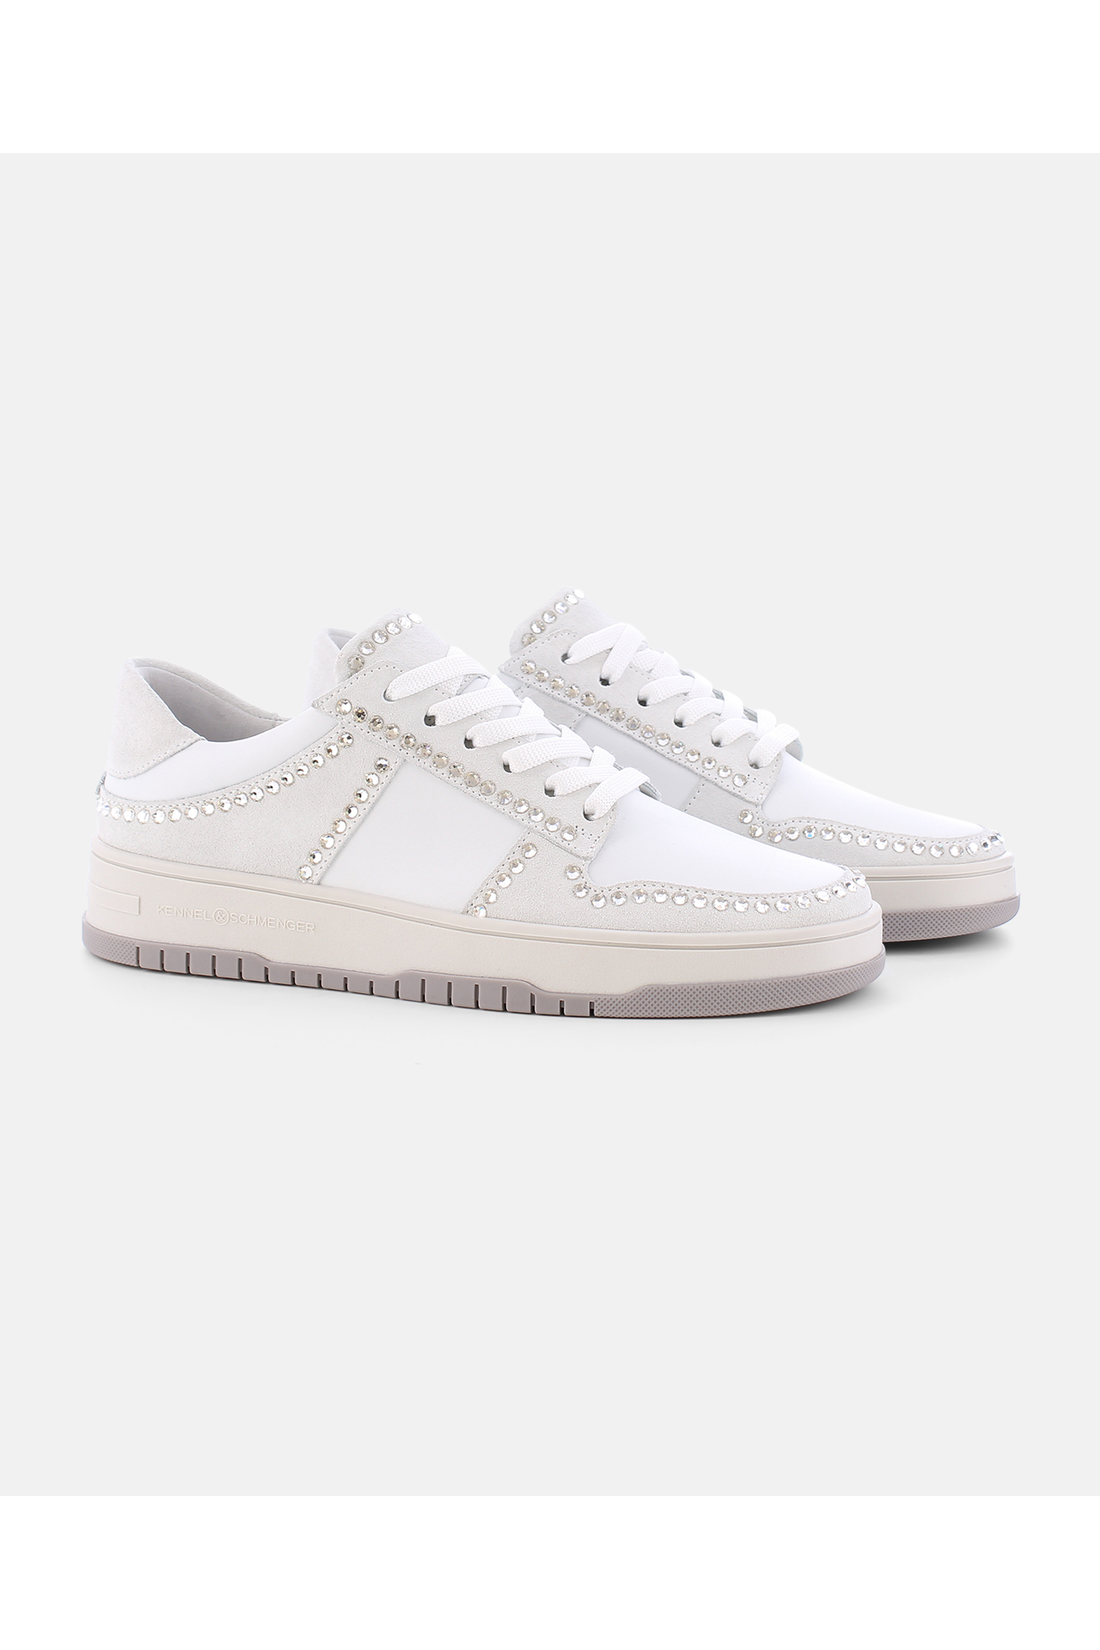 Kennel-Schmenger-OUTLET-SALE-DRIFT-Sneakers-2_5-35-Weiss-ARCHIVE-COLLECTION.png